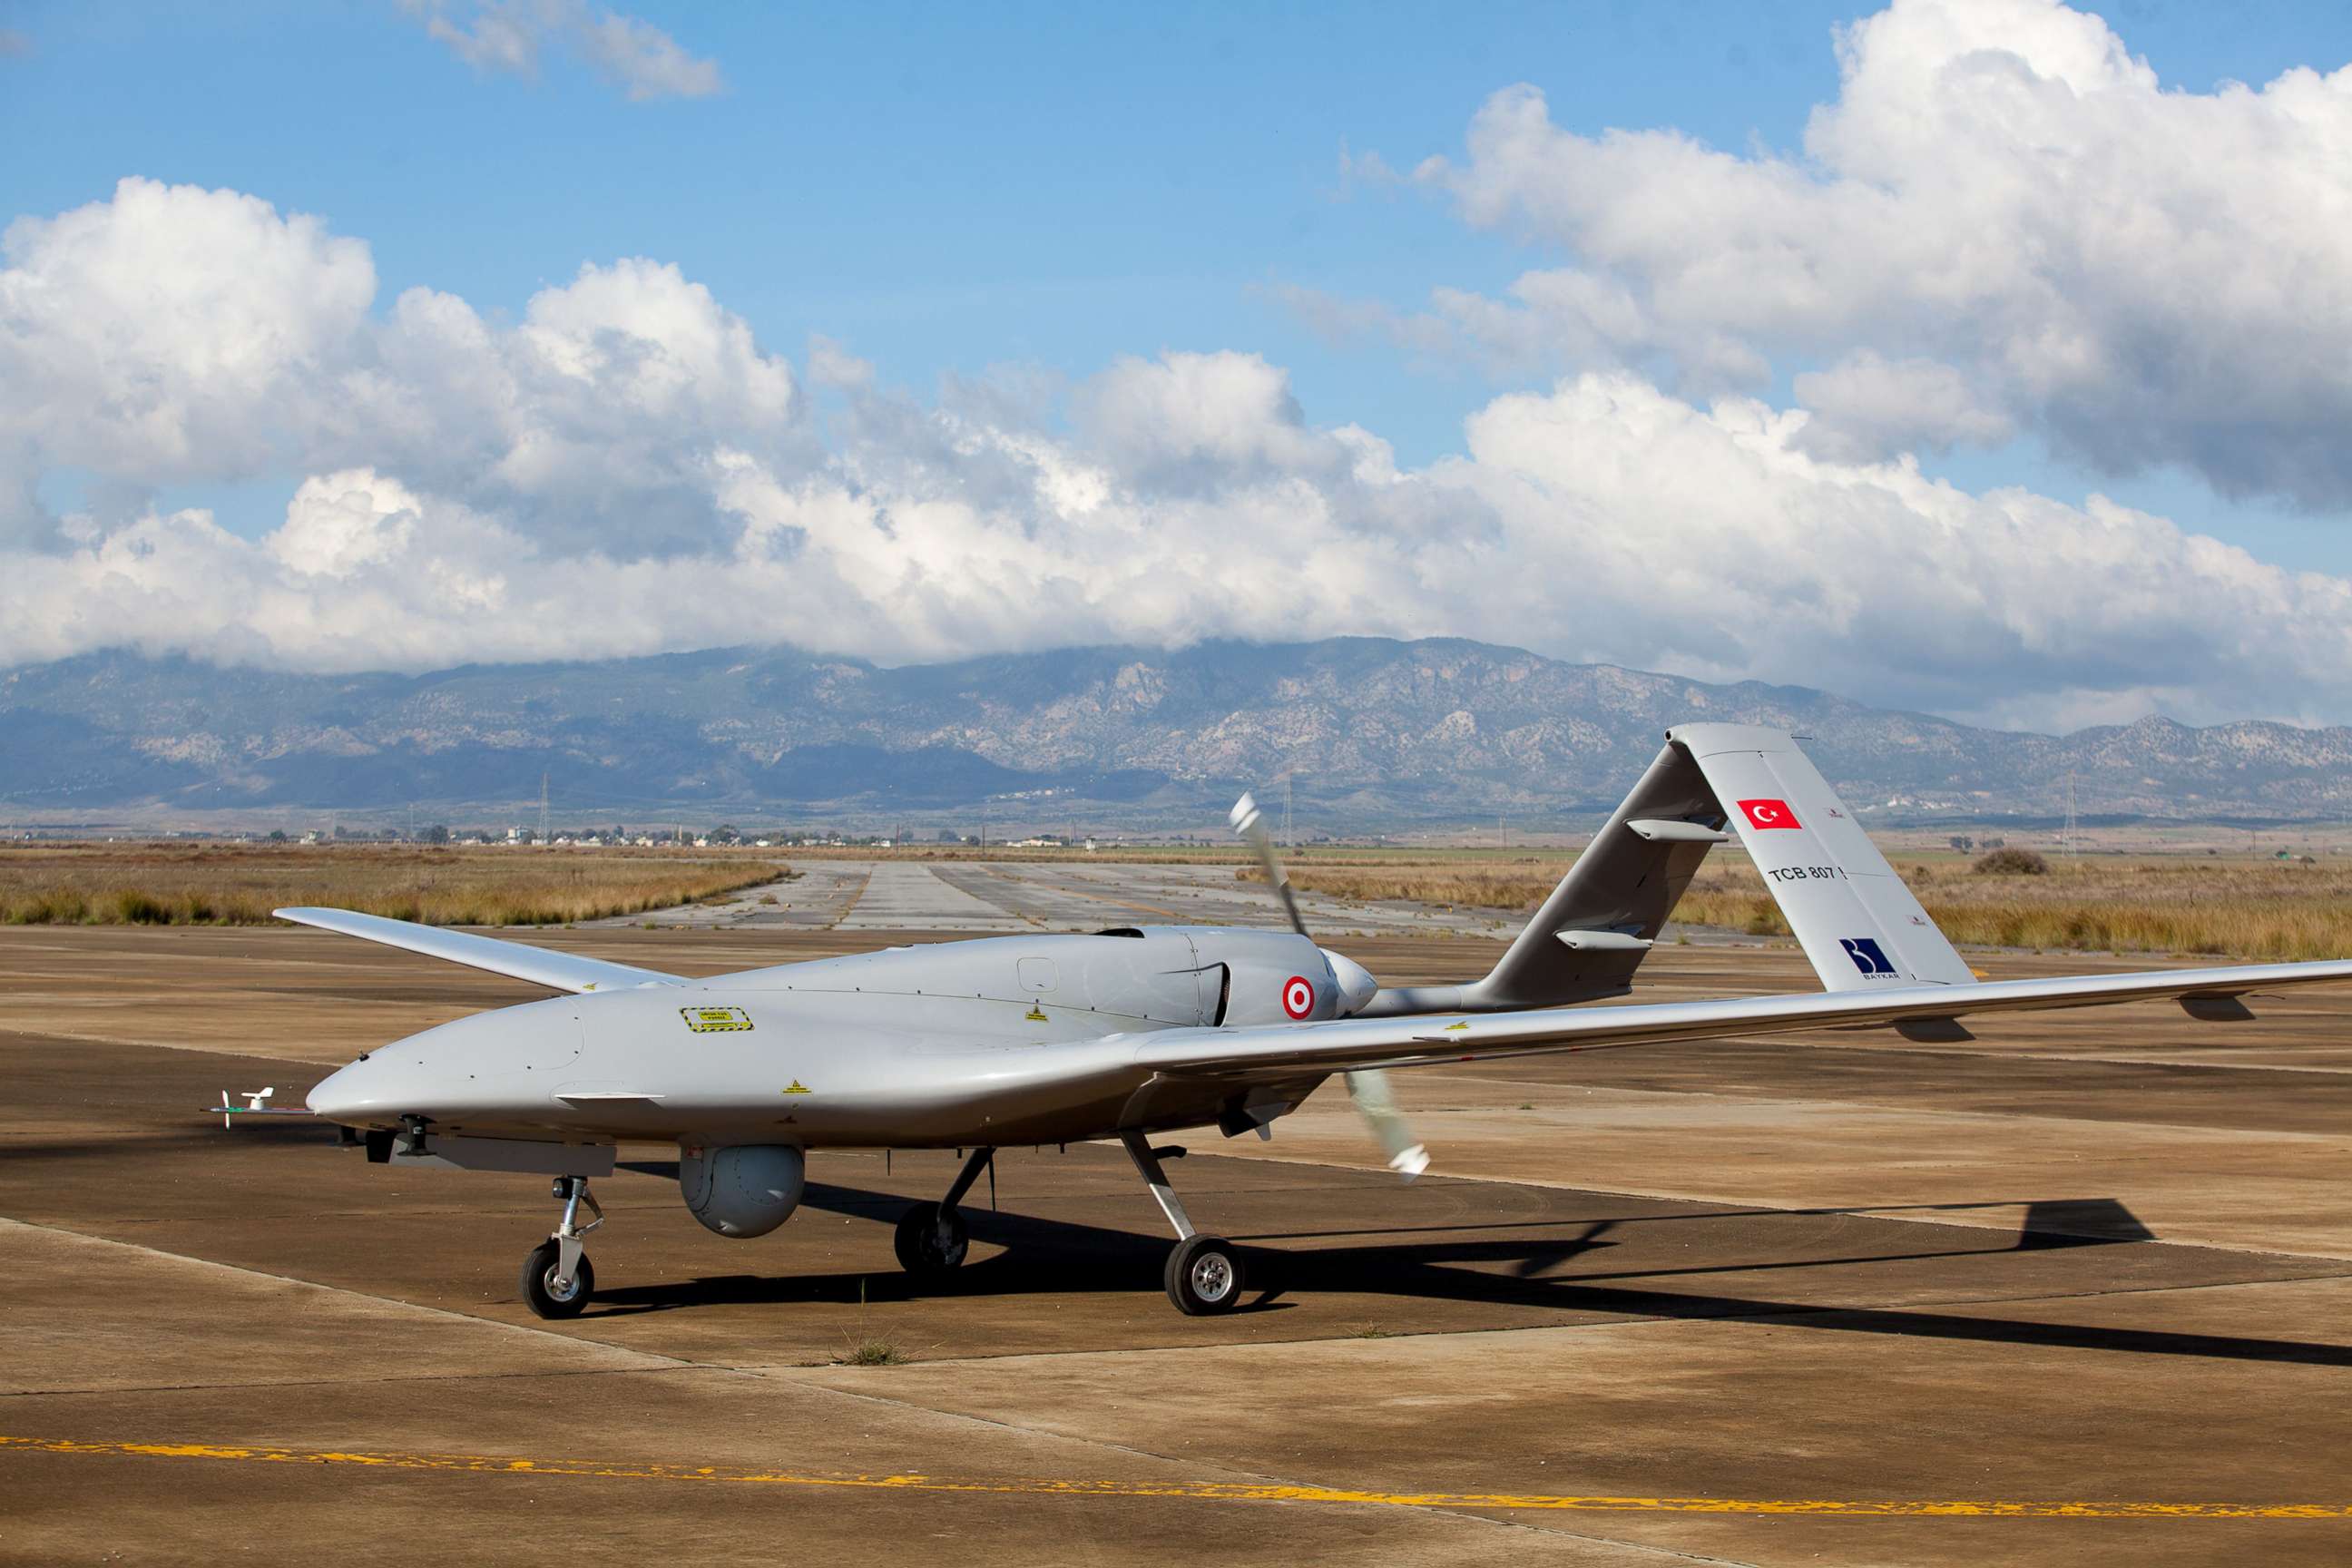 PHOTO: In this Dec. 16, 2019, file photo, a Turkish-made Bayraktar TB2 drone is shown at Gecitkale military airbase near Famagusta in the self-proclaimed Turkish Republic of Northern Cyprus.